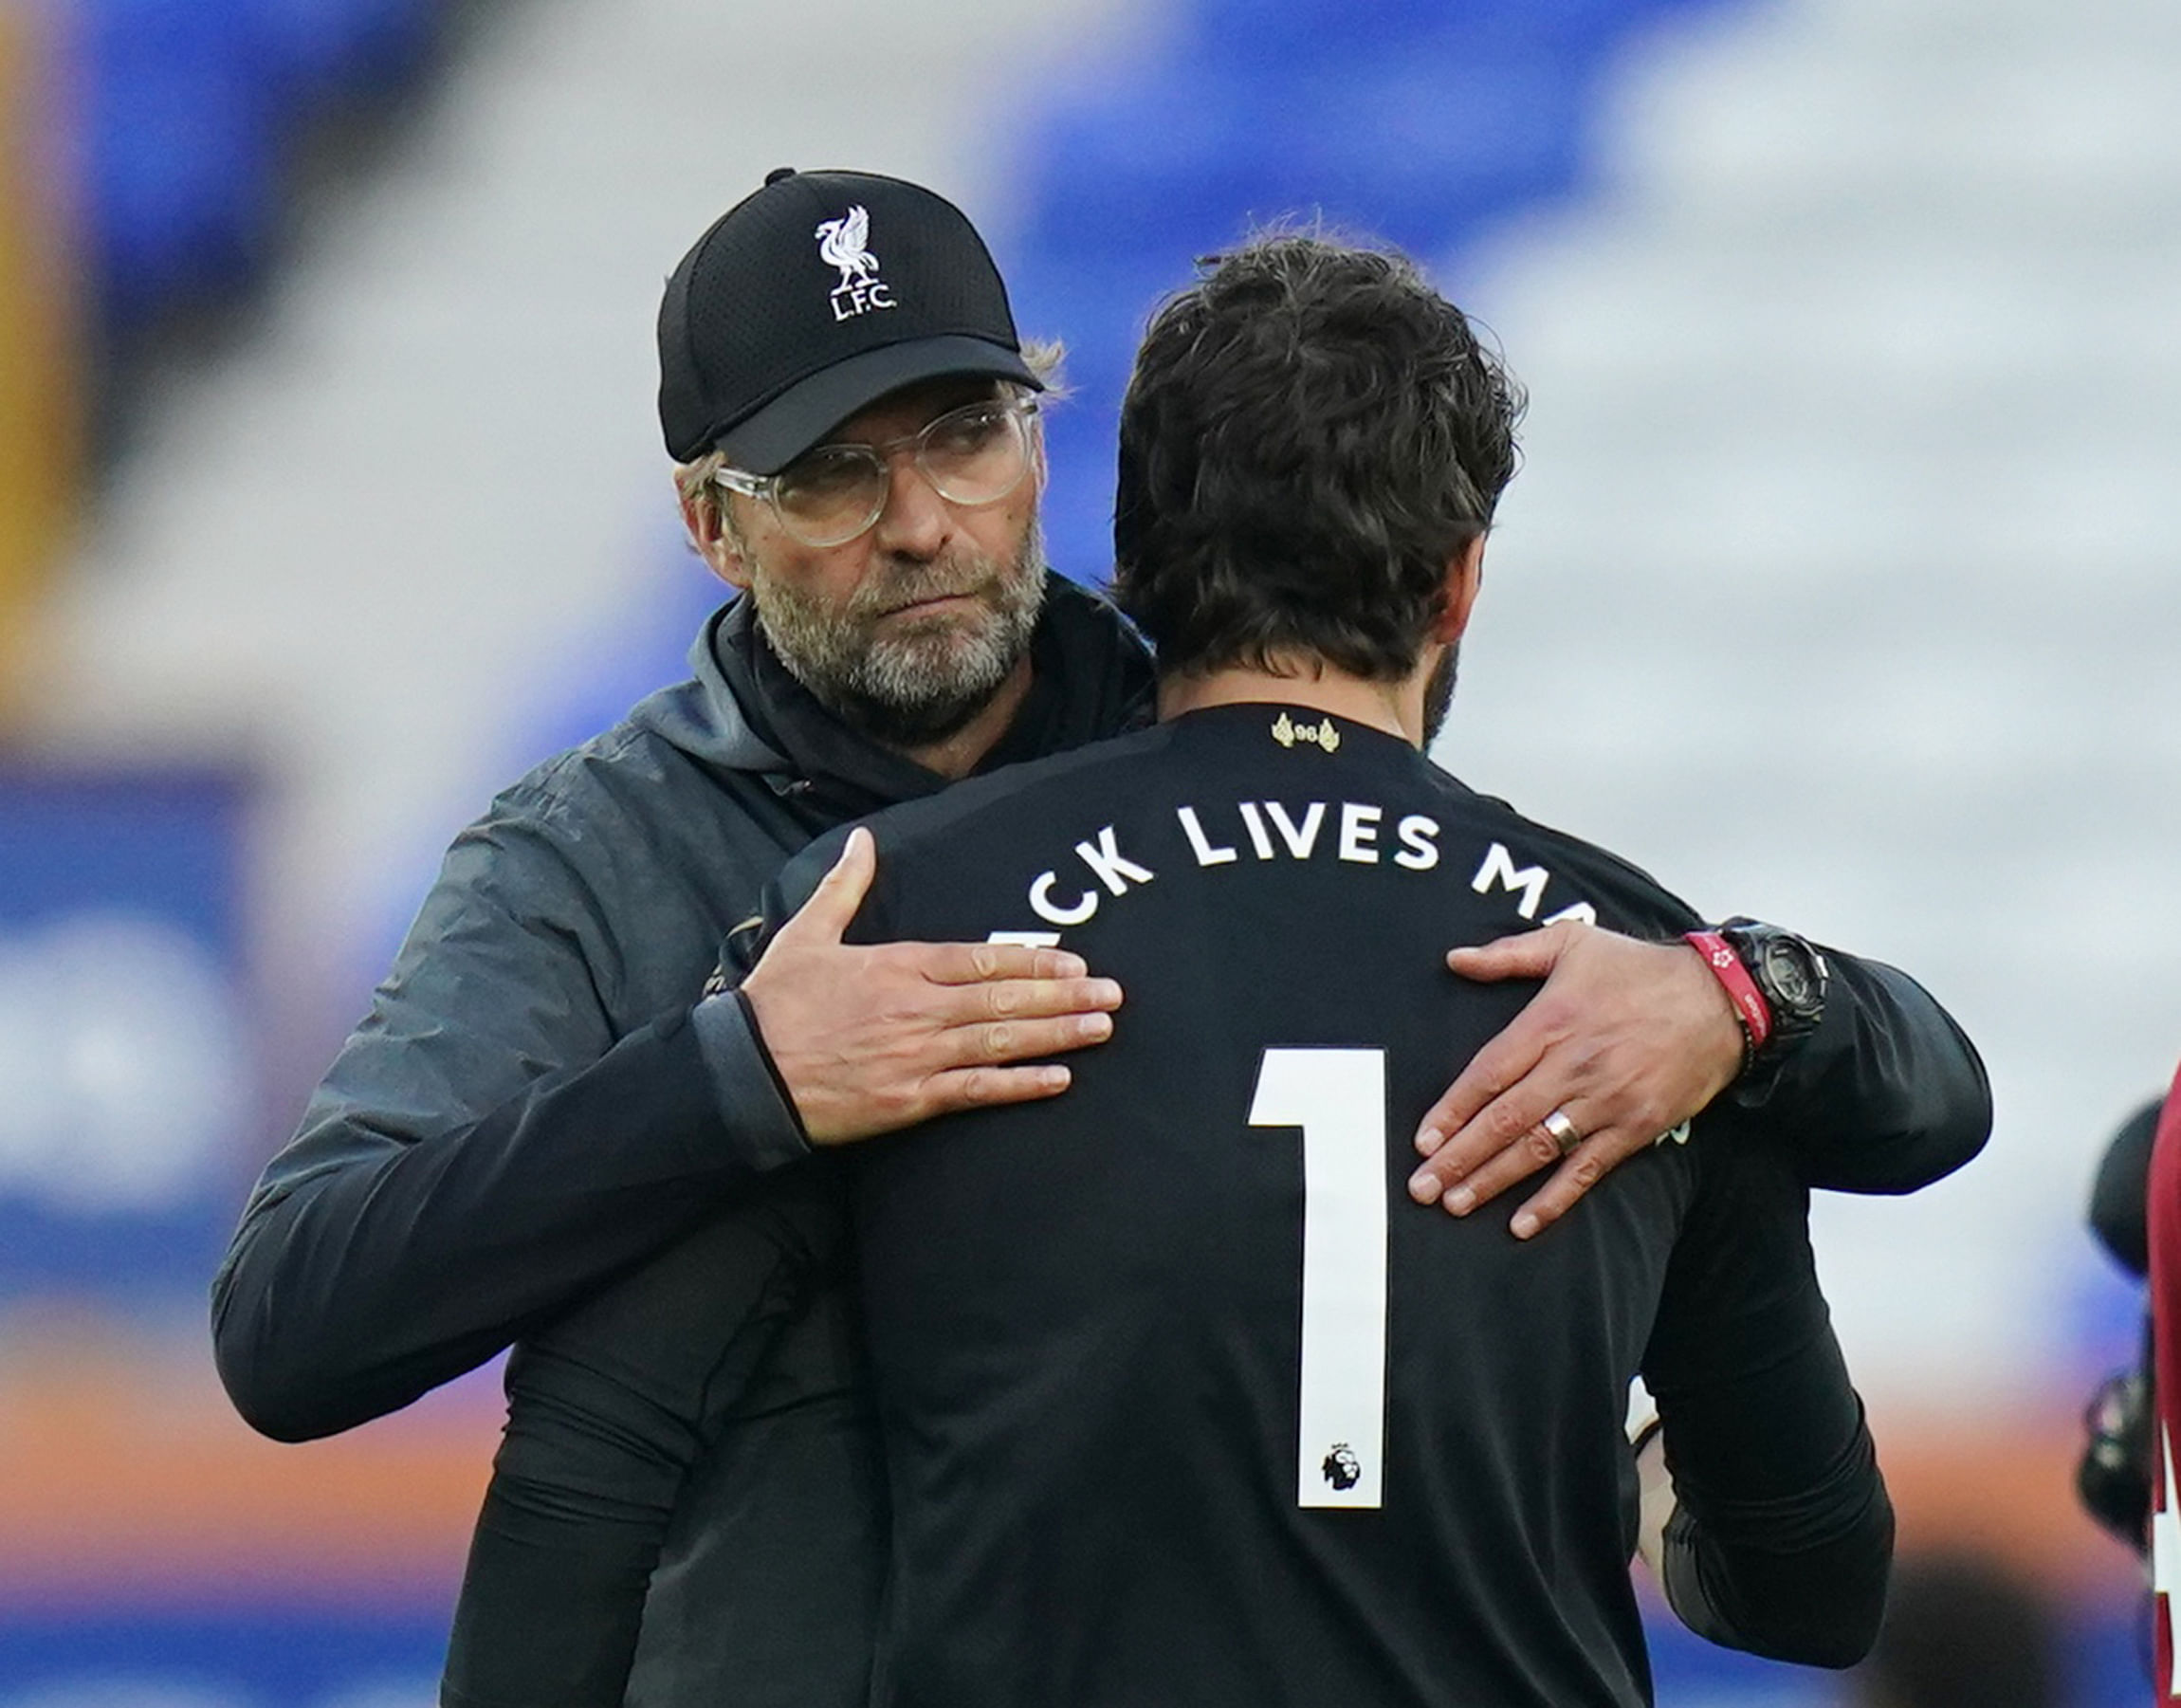 Animated by high-octane performances and Klopp’s characteristic “heavy metal” football, Liverpool have not just been galvanised by their leader, but also shaped into a winning machine that combines the physical, visceral and cerebral aspects of the beautiful game to perfection. Credit: Reuters